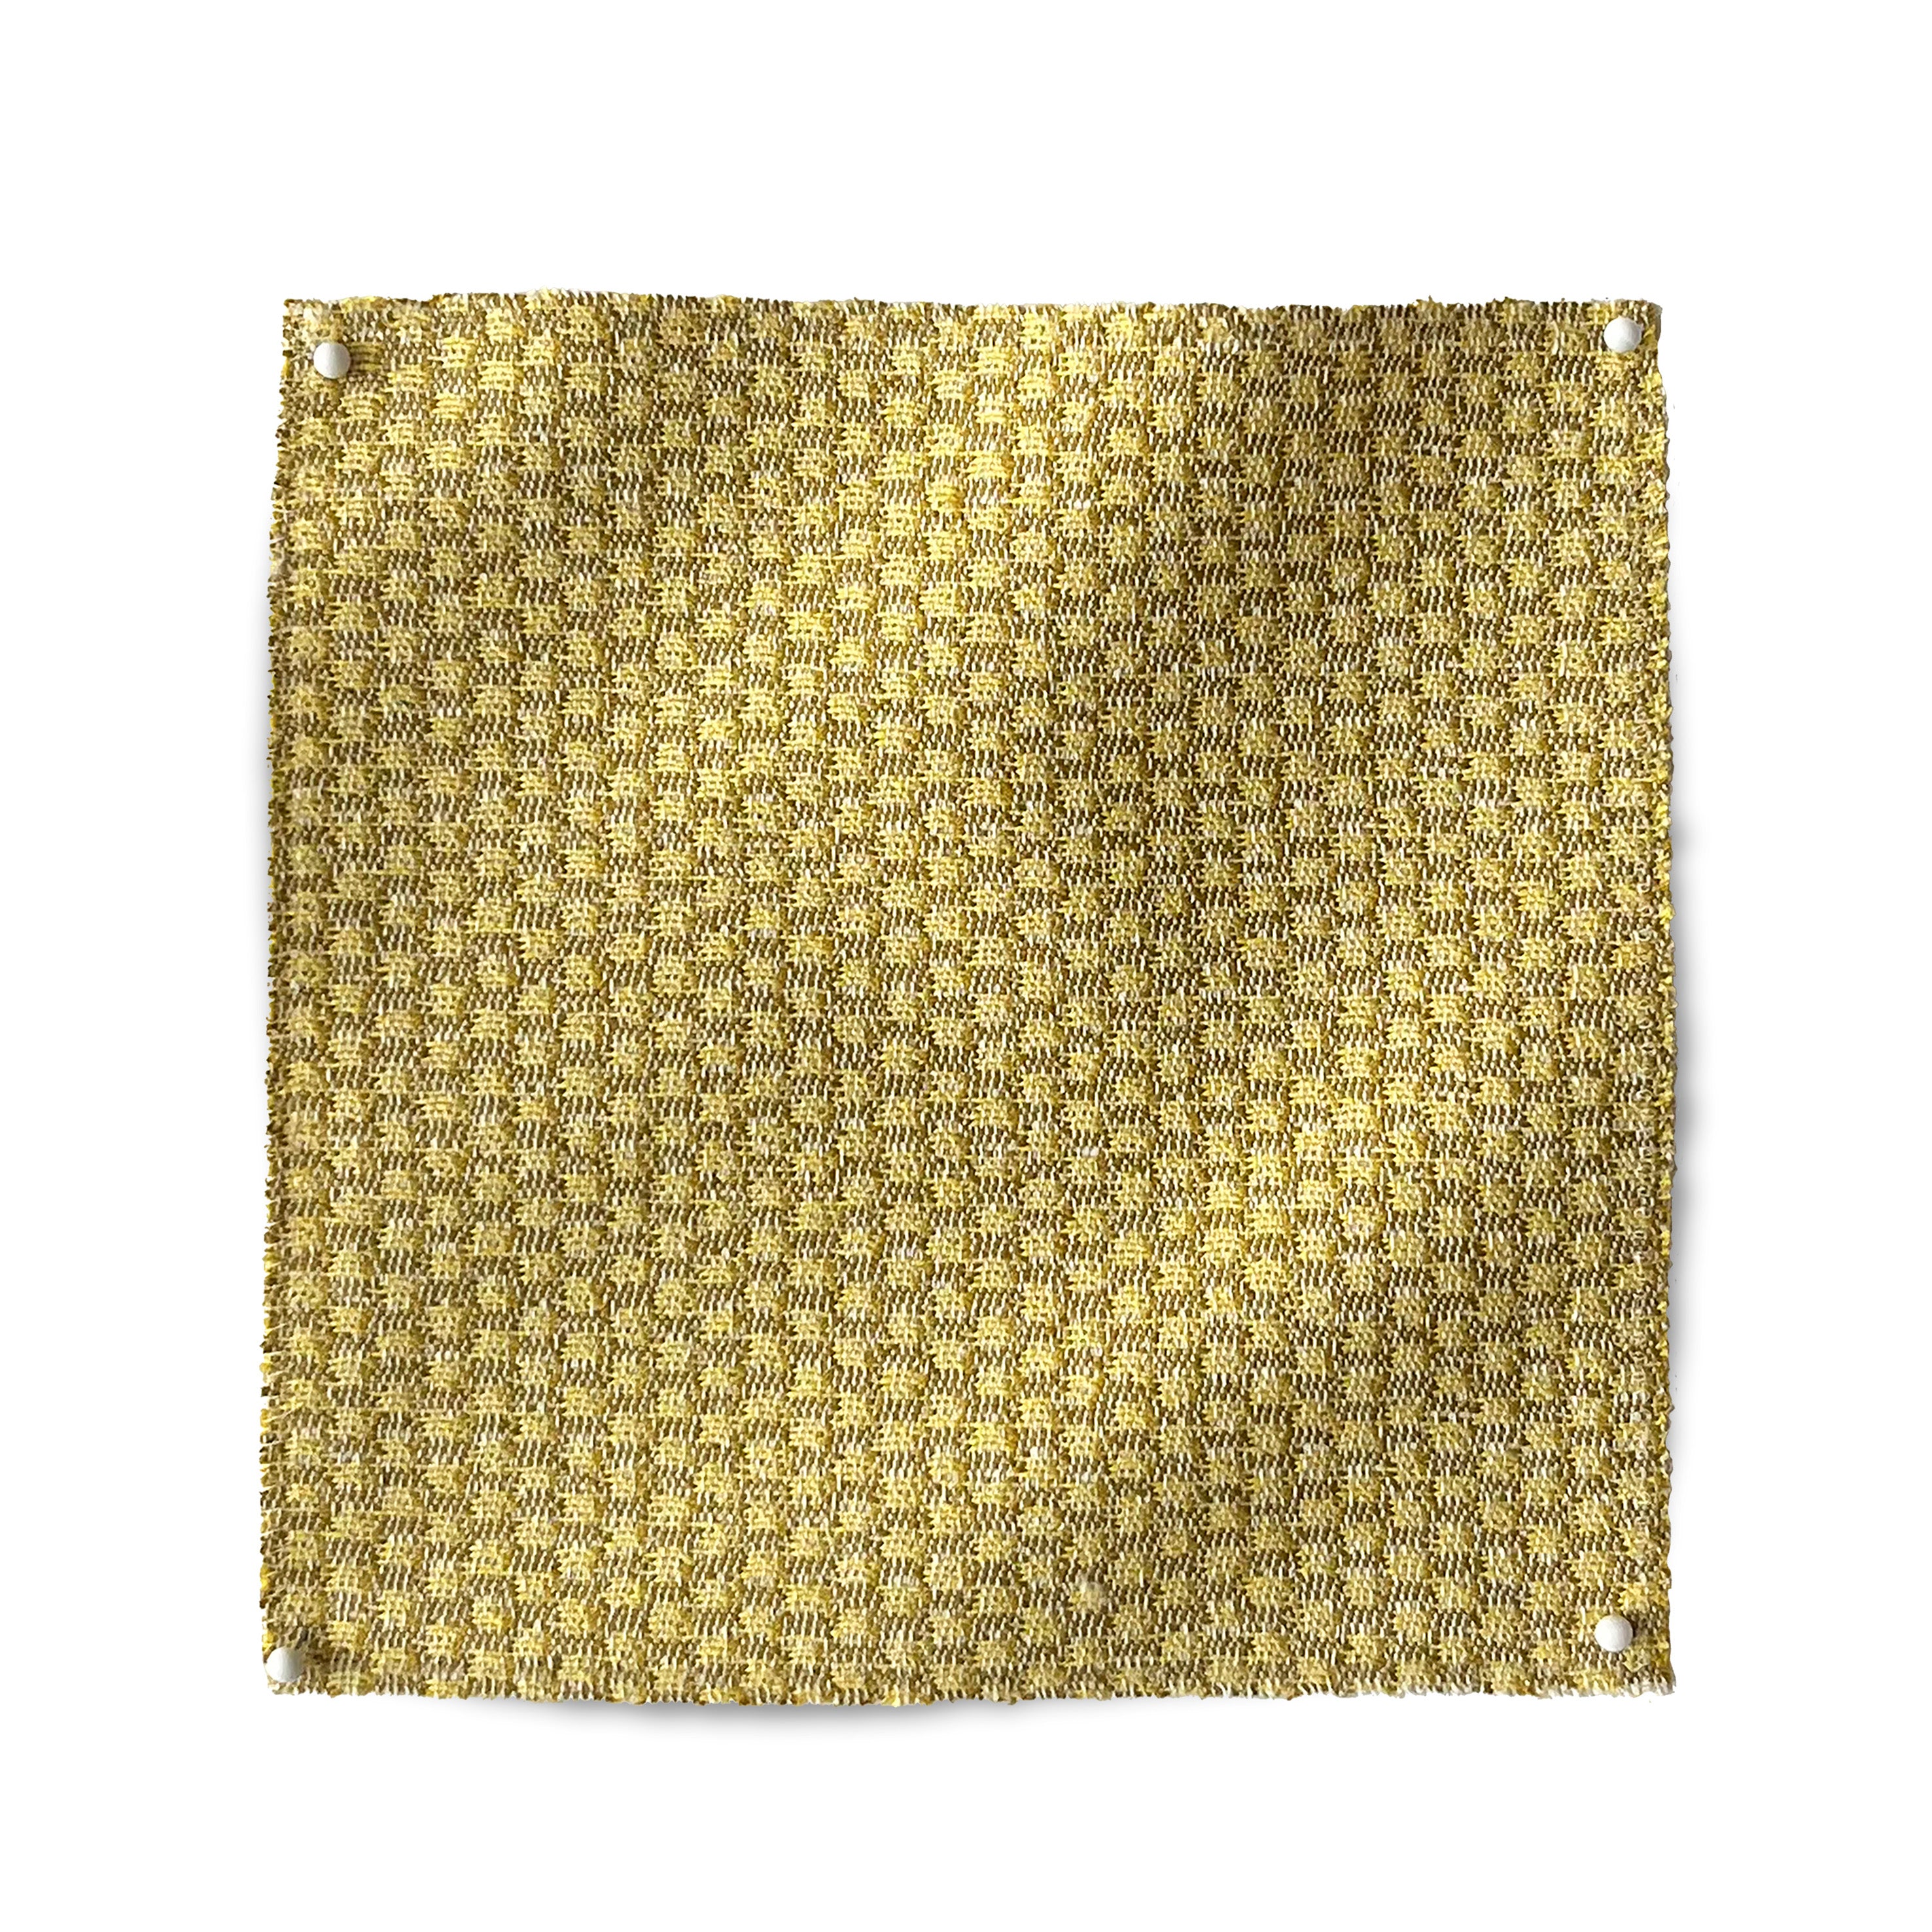 Square fabric swatch showing the reverse side of a dense checked weave in gold and tan.